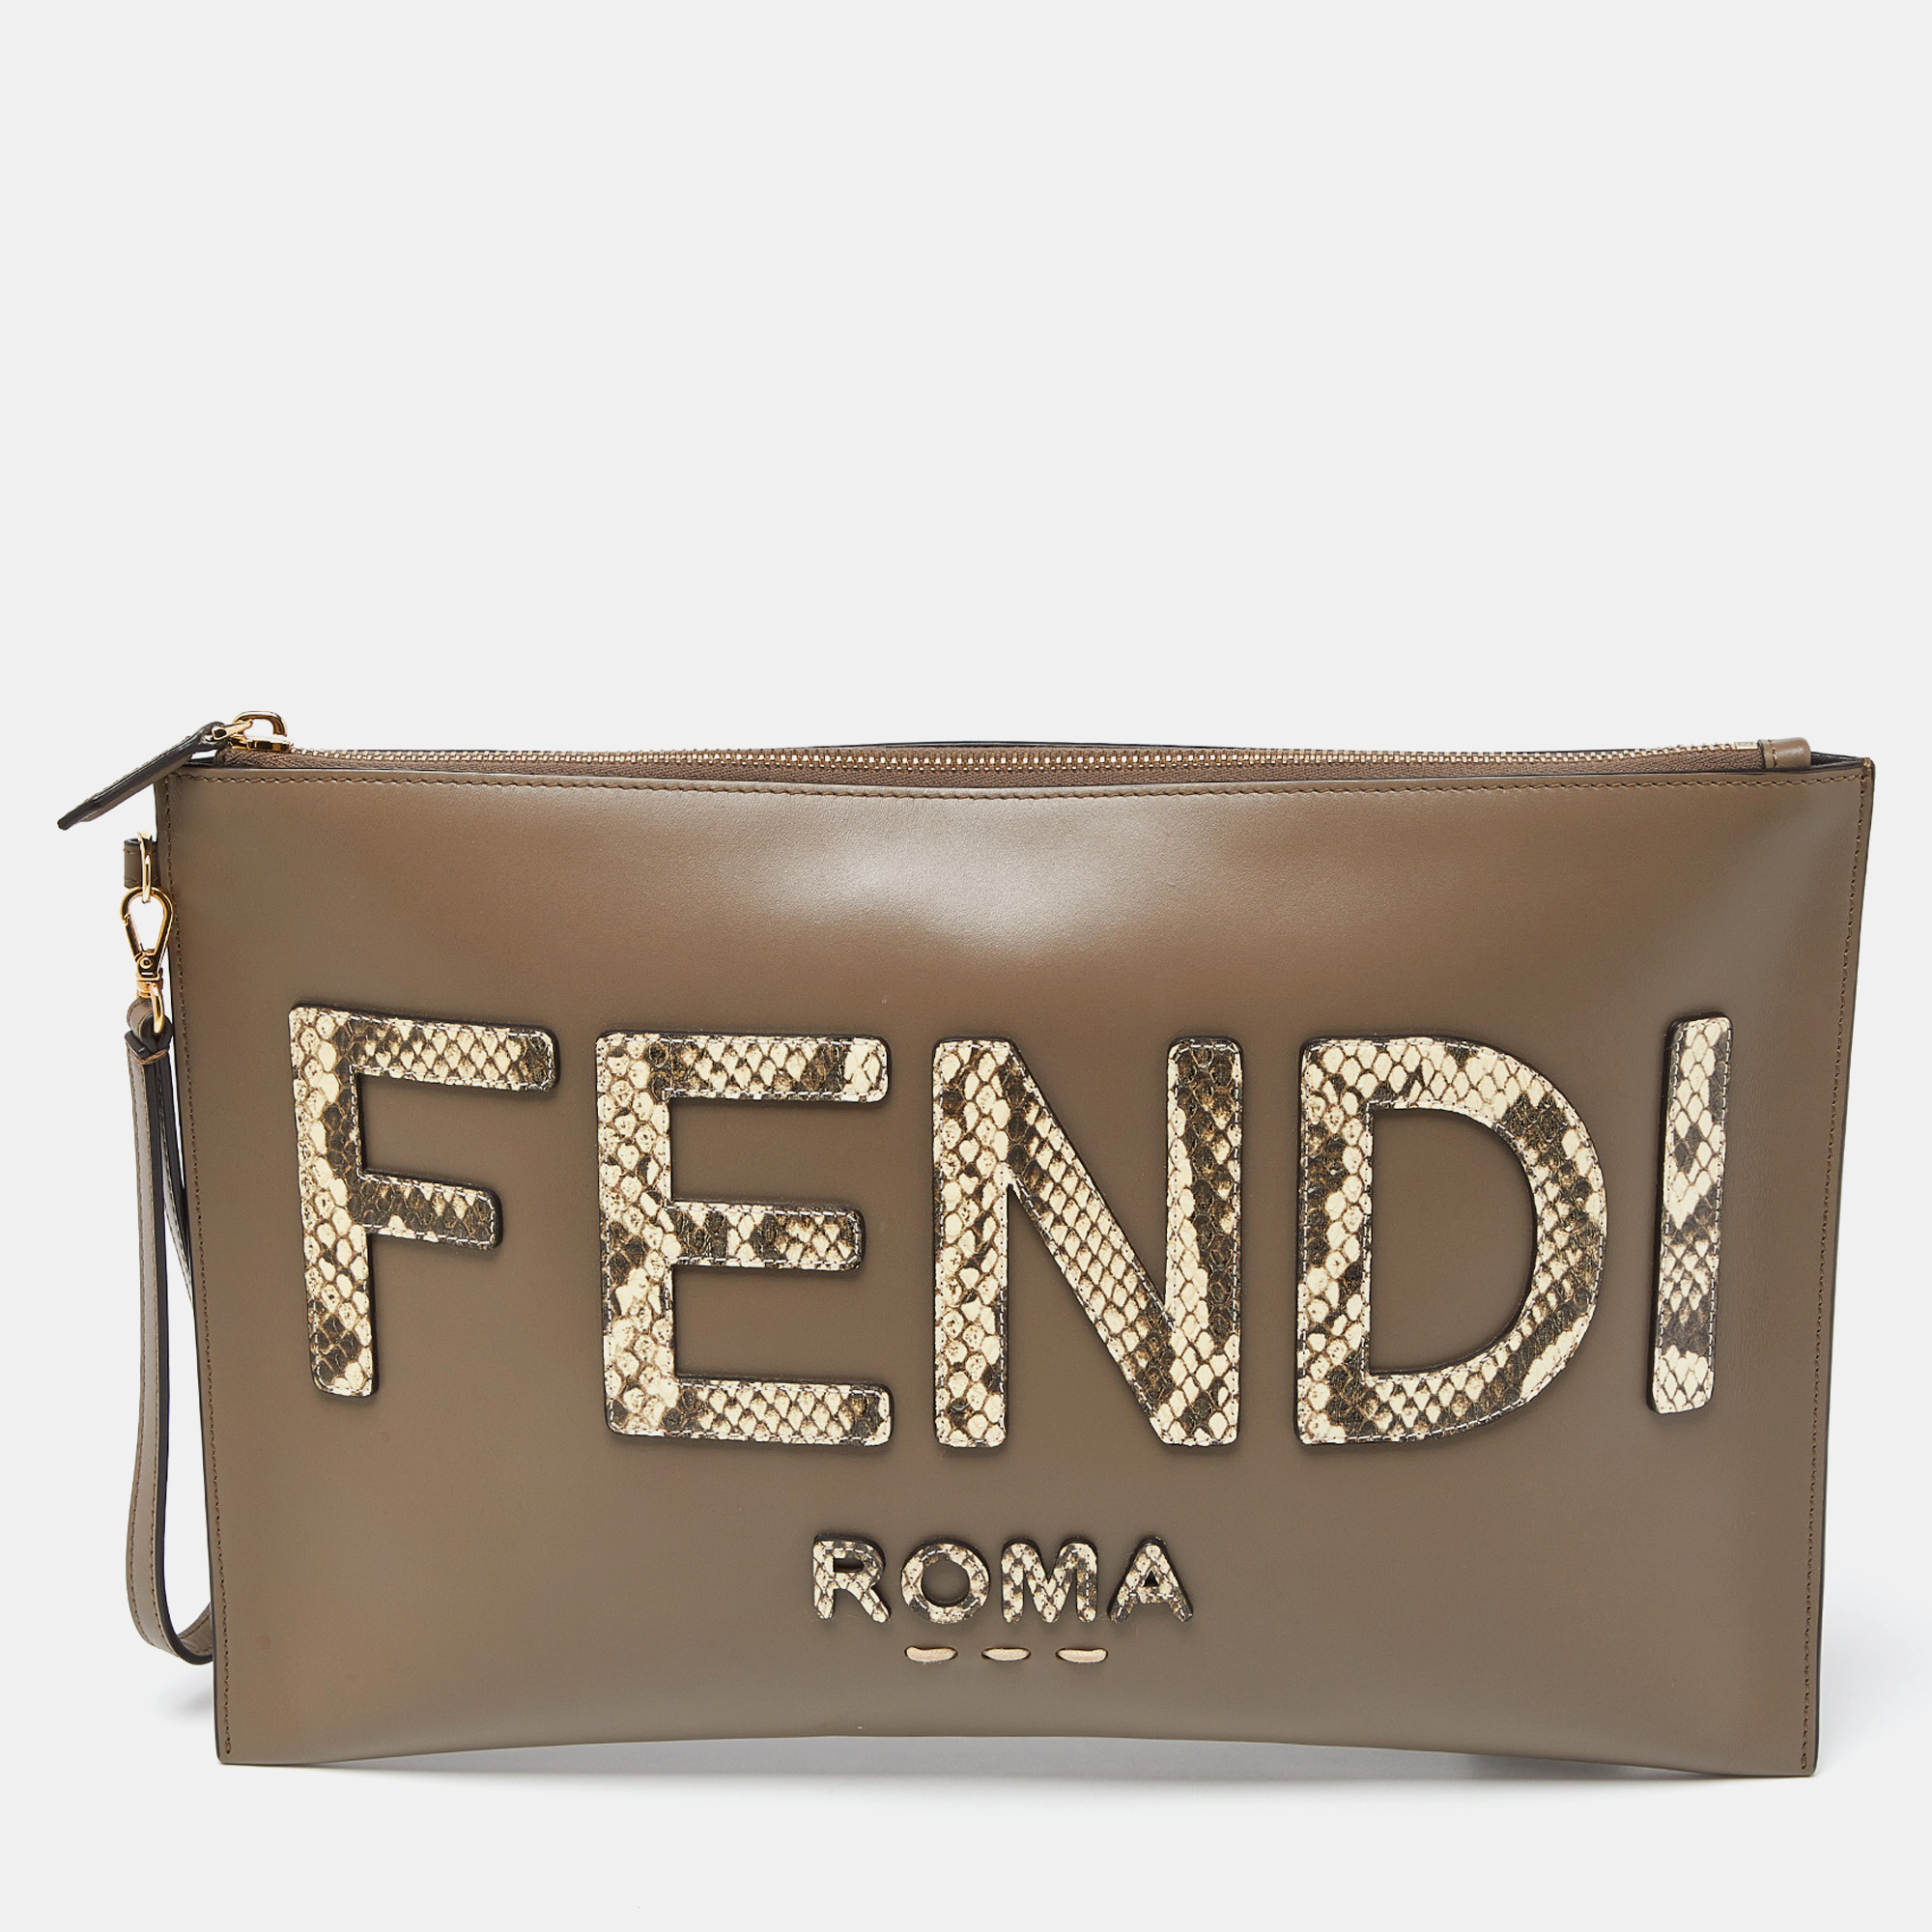 Fendi beige leather and python embossed leather roma flat wristlet pouch